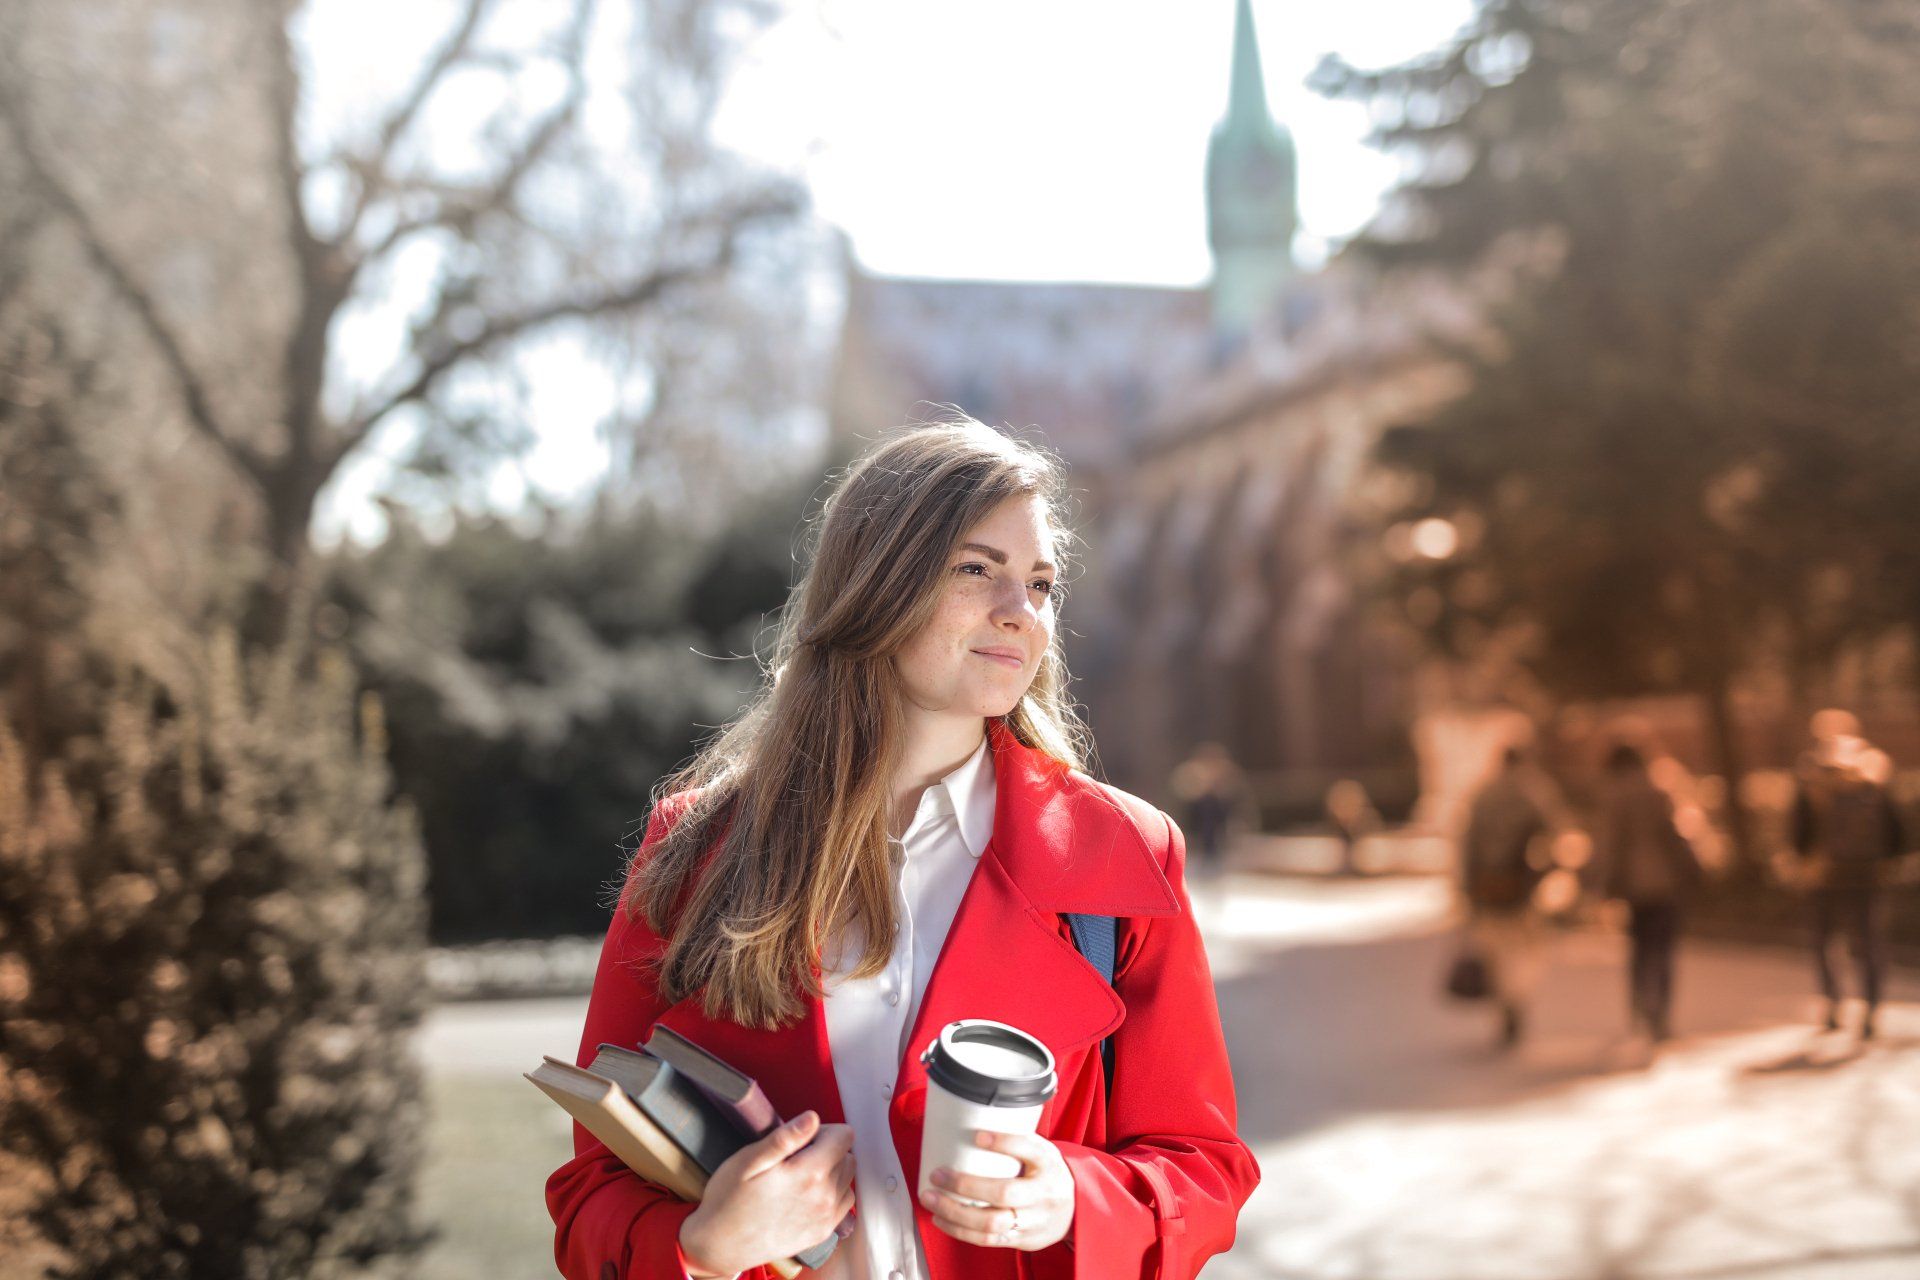 Teen girl in red blazer holding a cup of coffee and standing on a college campus looking around.